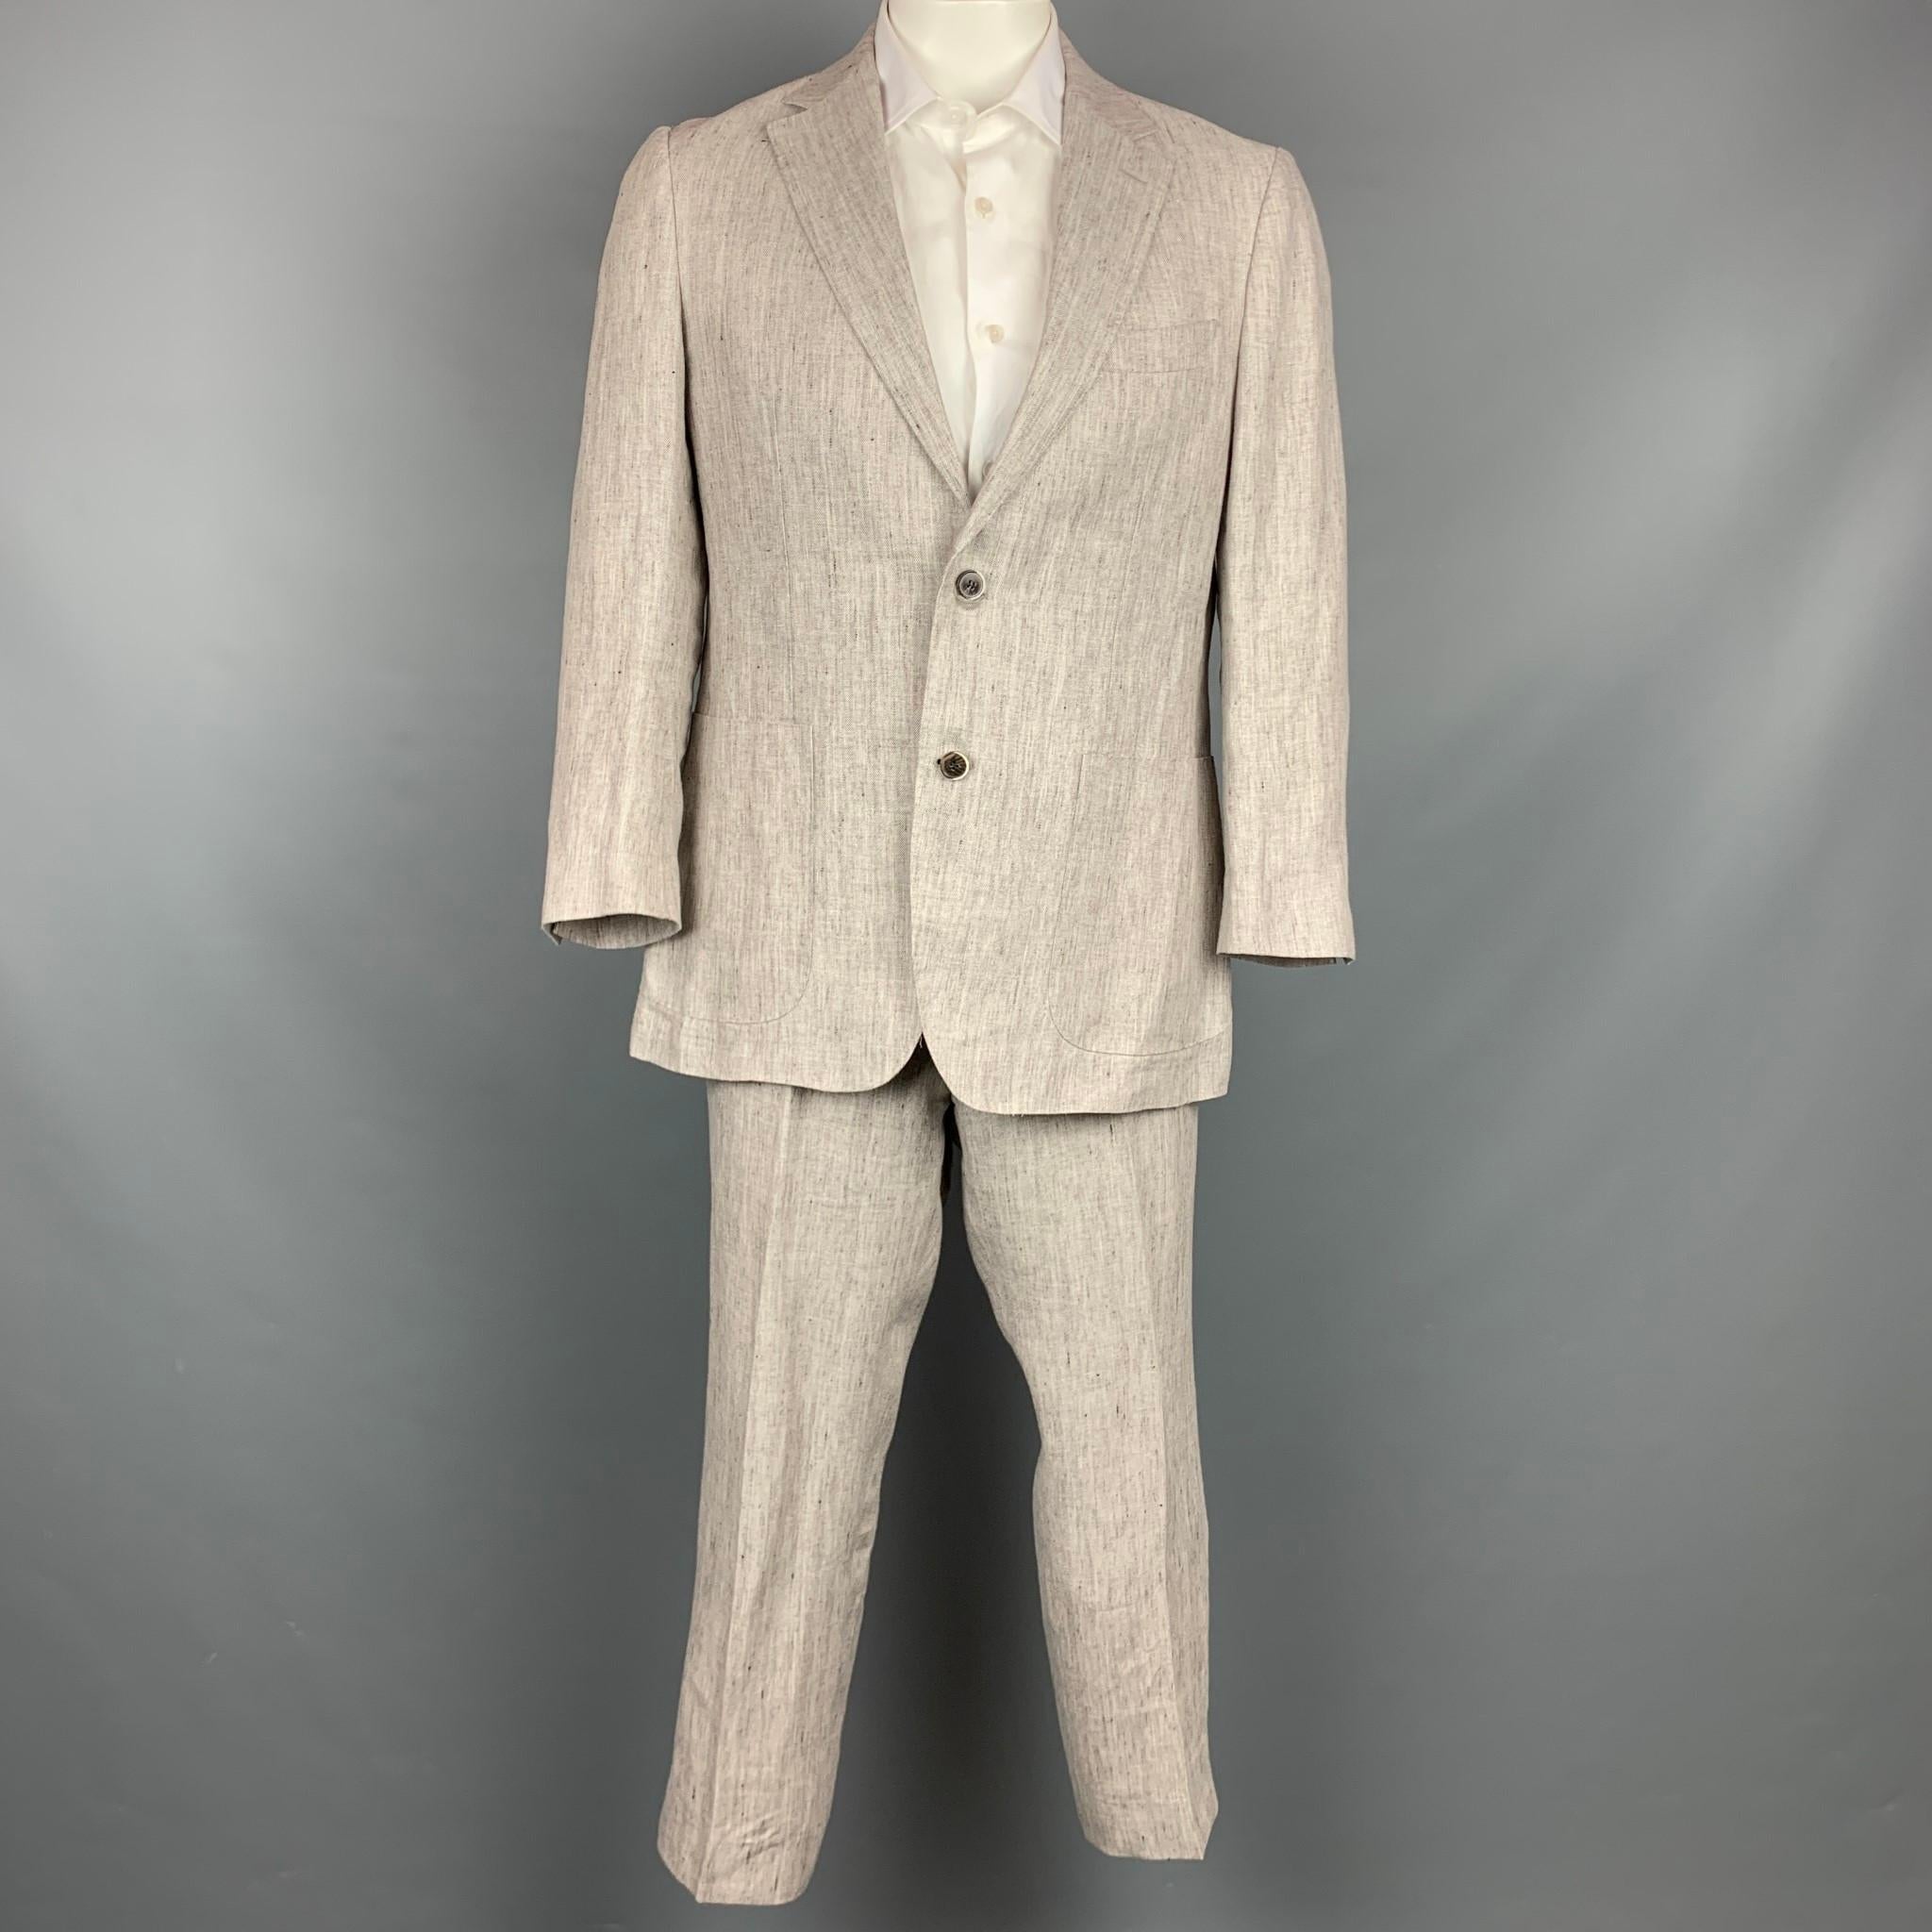 SUIT SUPPLY suit comes in a oatmeal textured linen with a half liner and includes a single breasted, two button sport coat with notch lapel and matching flat front trousers.

Very Good Pre-Owned Condition.
Marked: Jacket: 54
Pants: